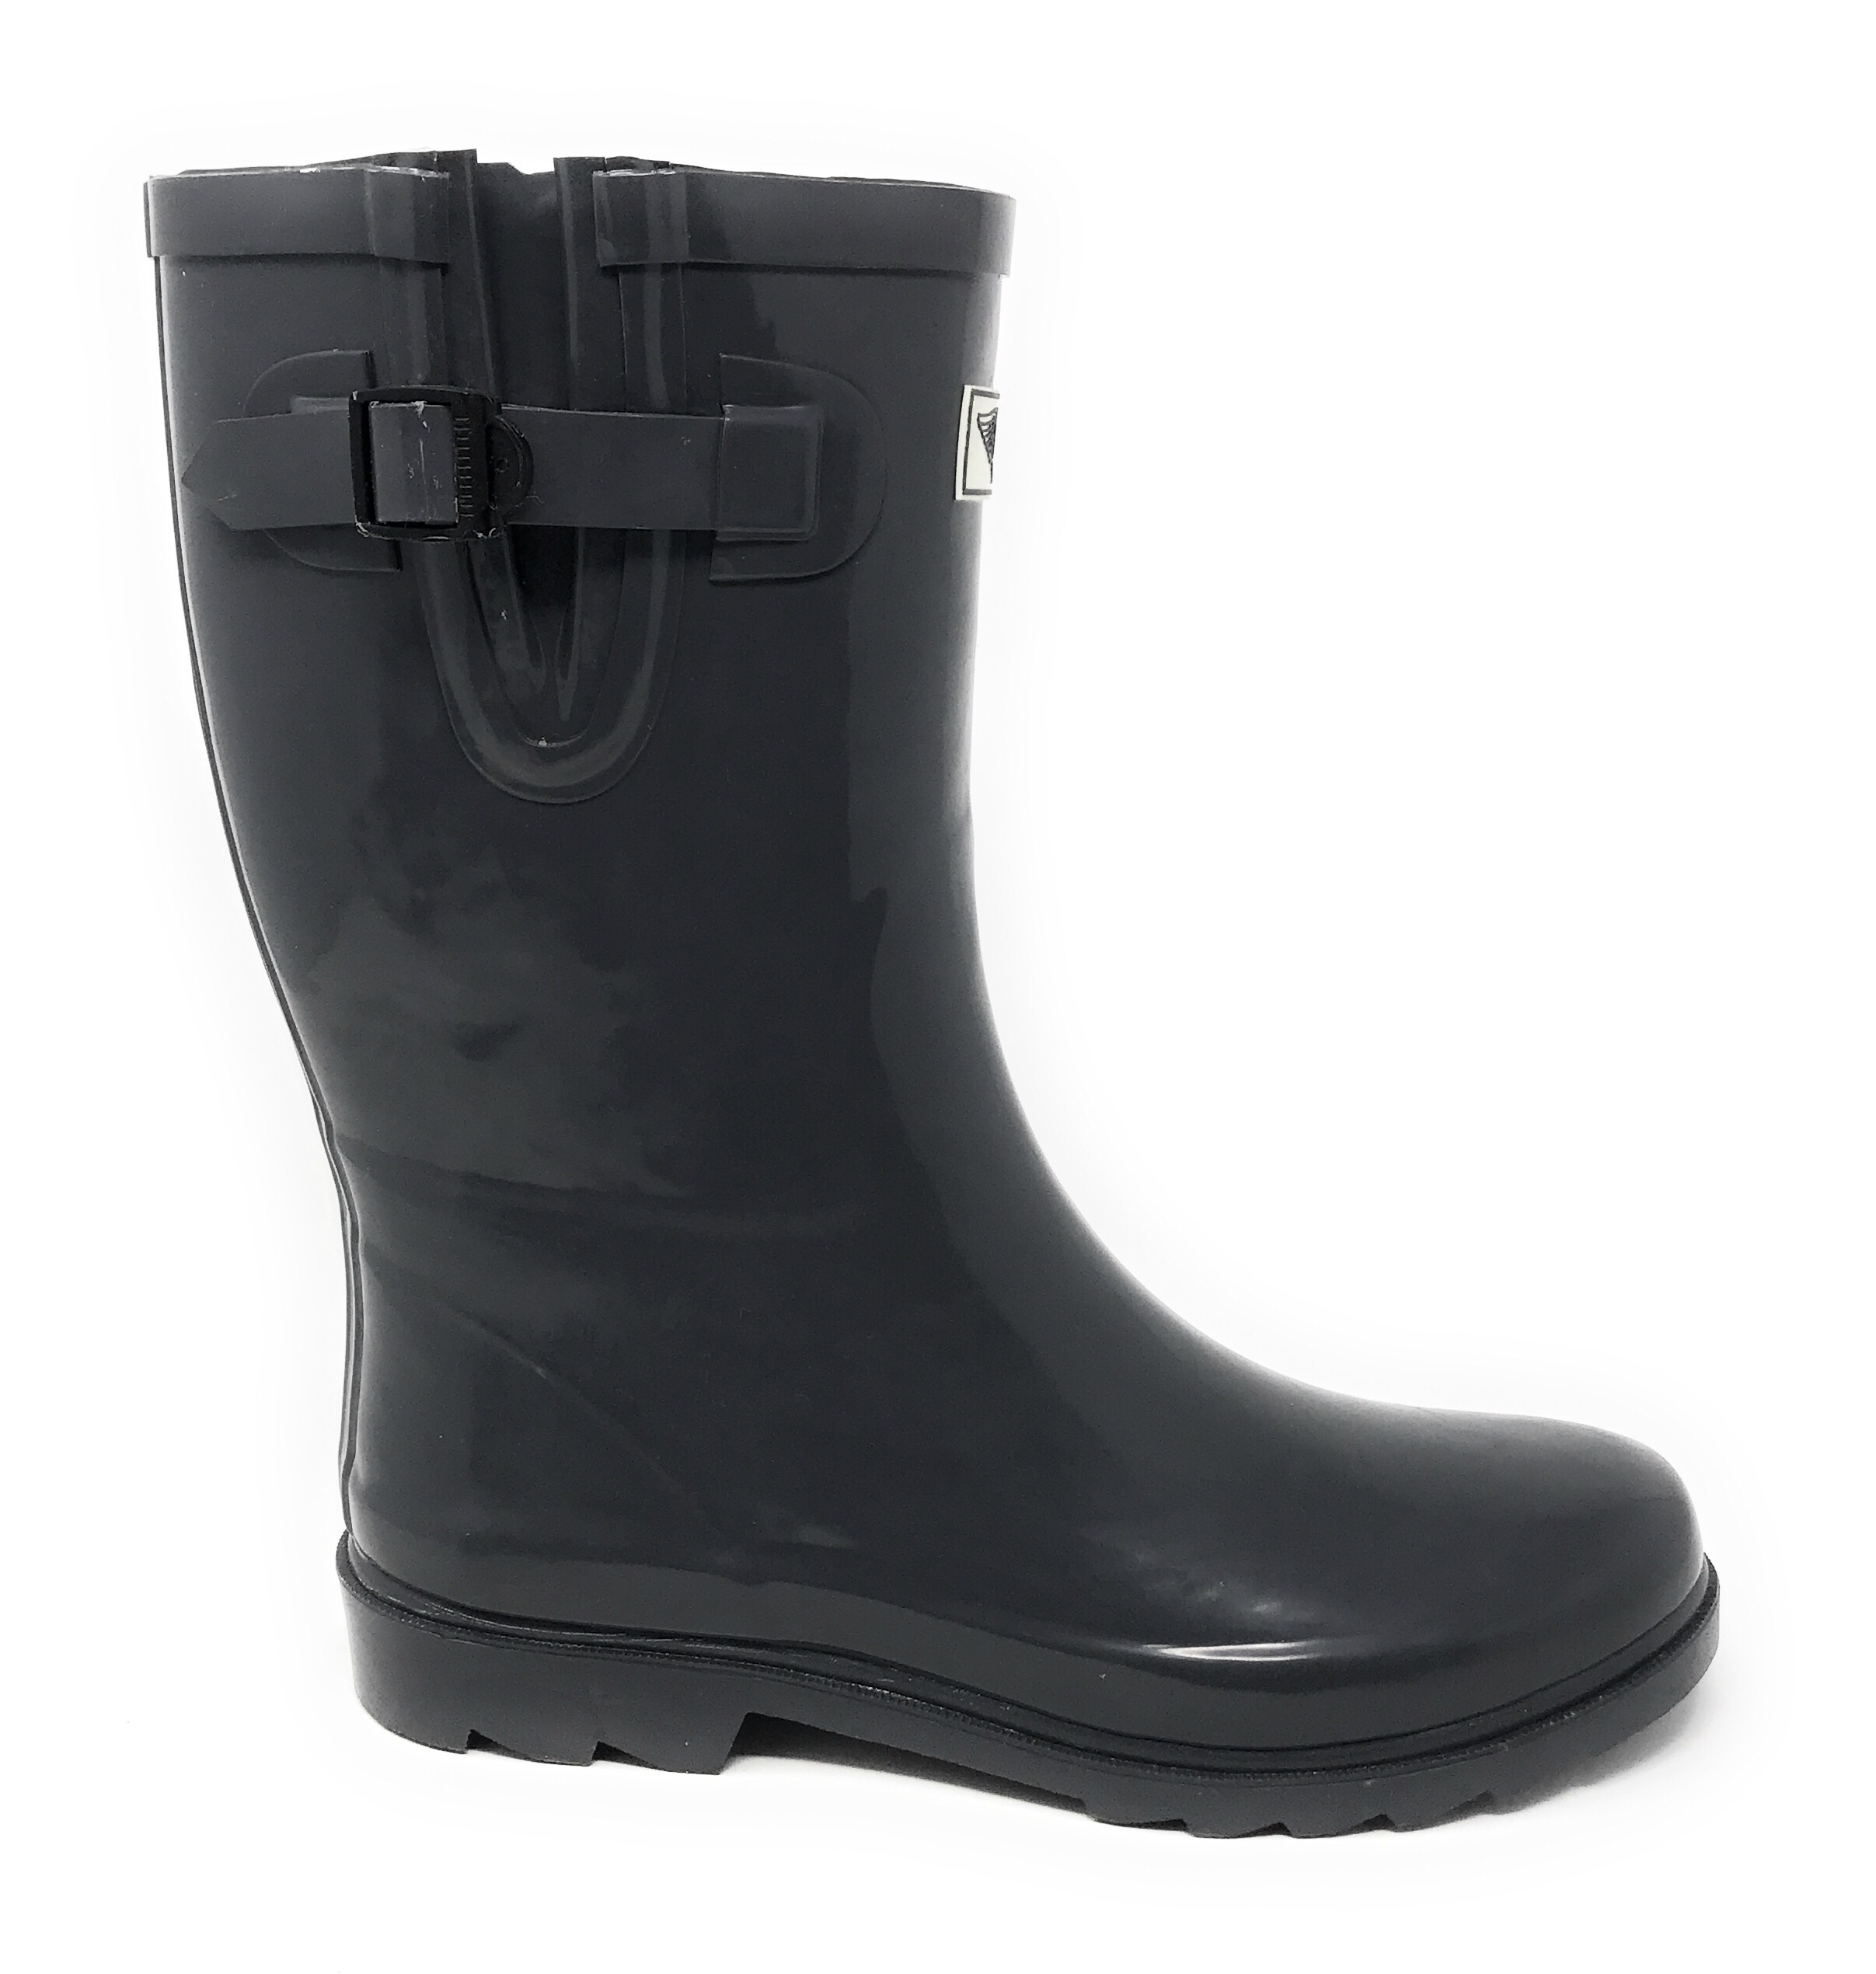 Forever Young Women's Short Shaft Rain Boots - image 5 of 5